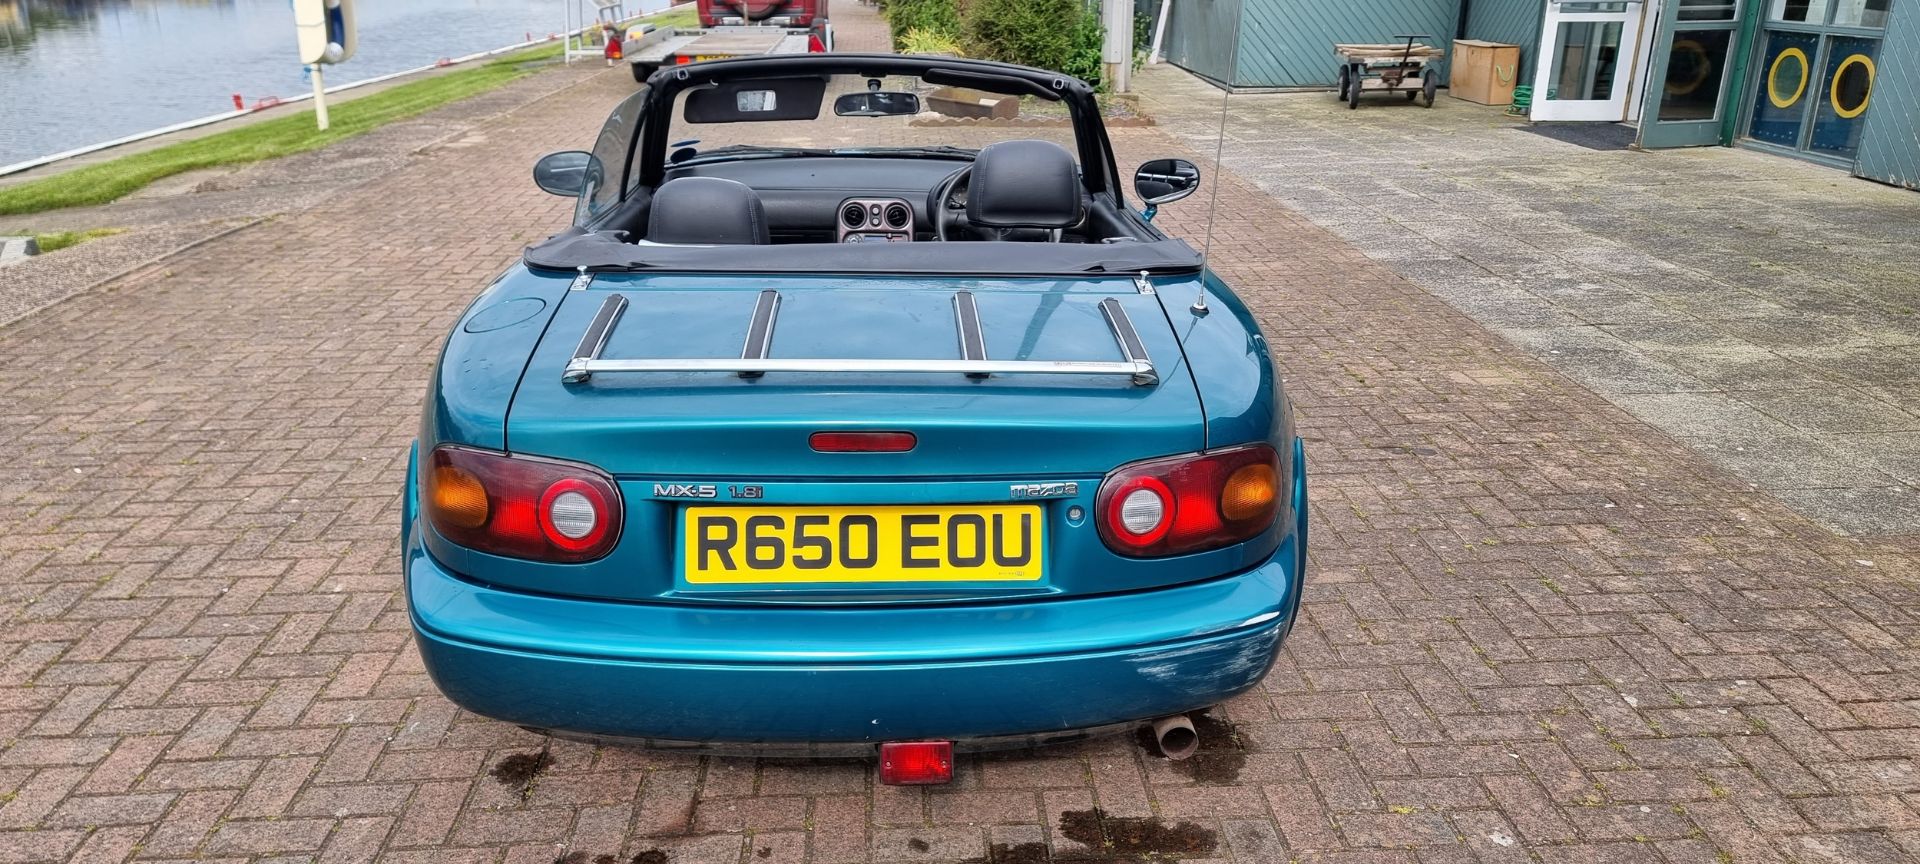 1998 Mazda MX5 Berkeley Limited Edition, 1840cc, project. Registration number R650 EOU. VIN number - Image 5 of 17